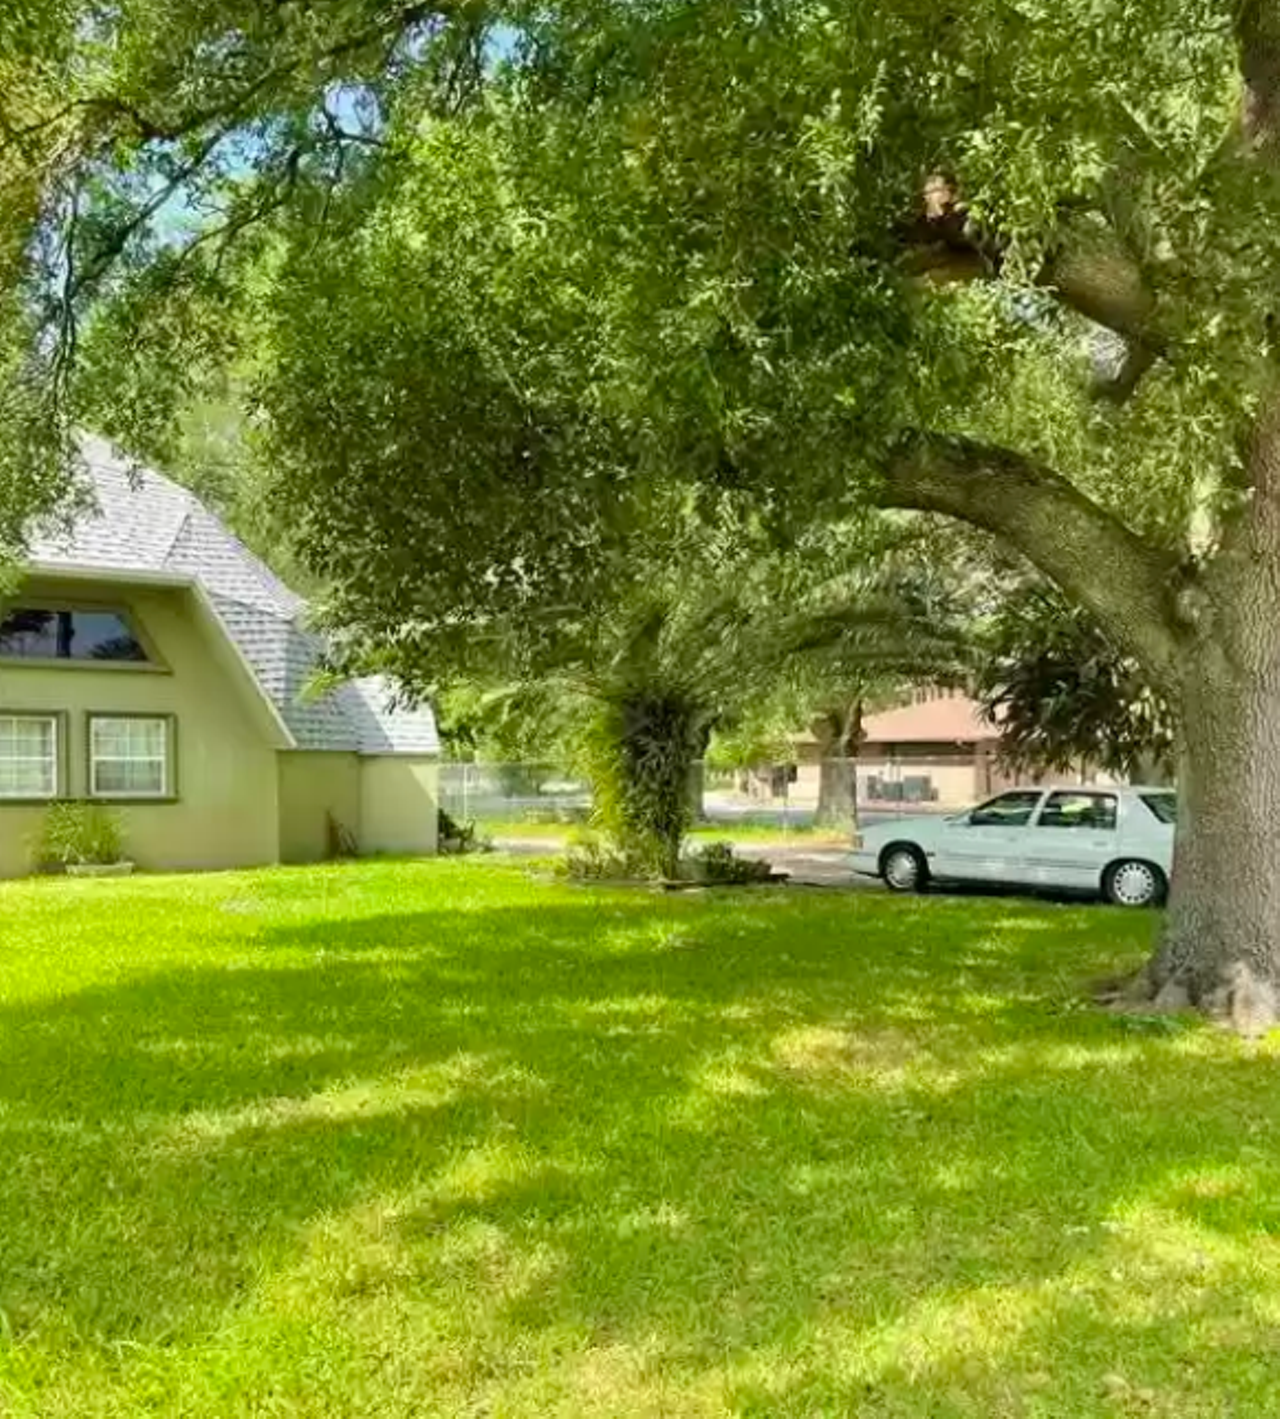 Two-story dome home in Auburndale on sale for $225K